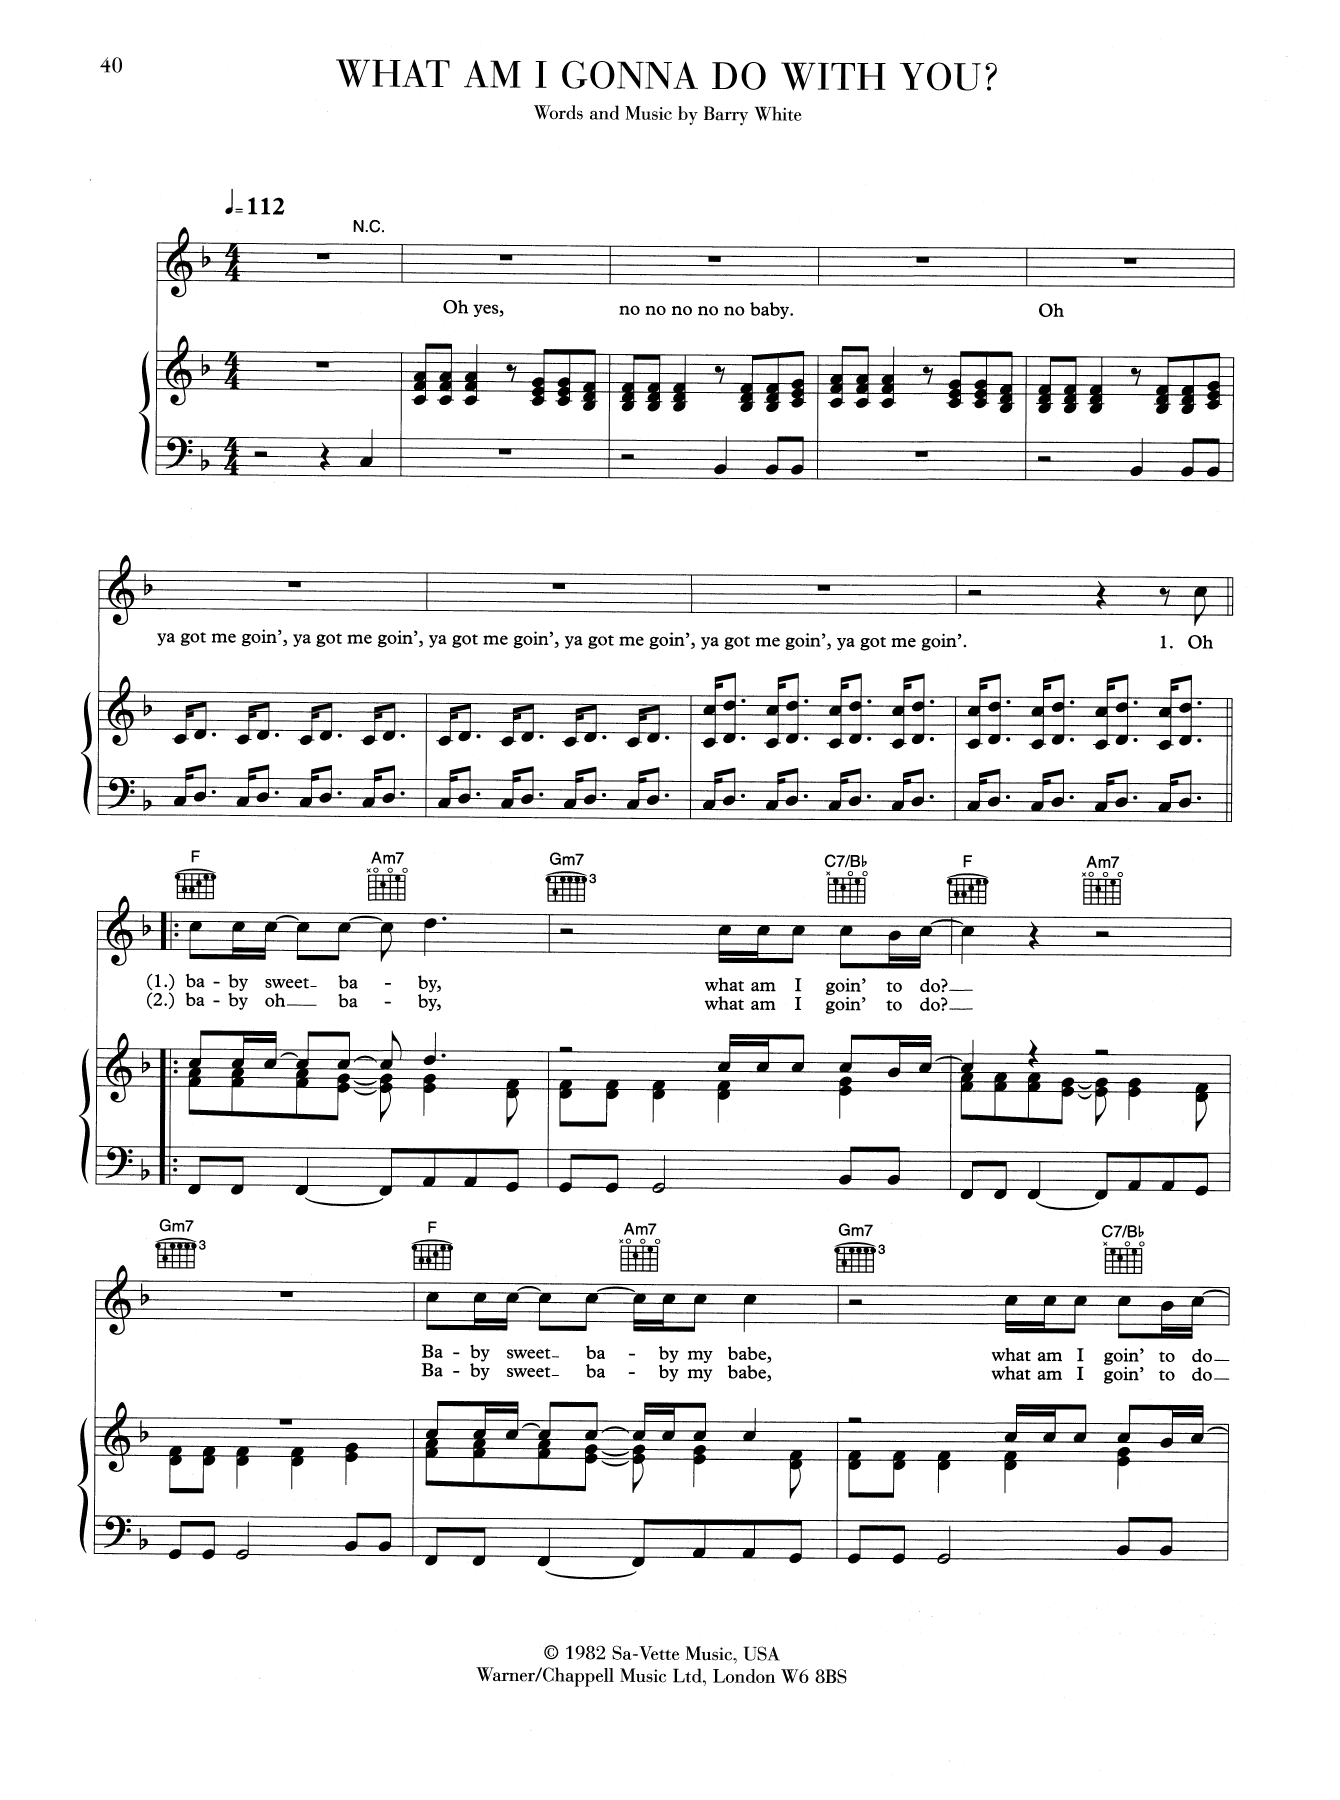 Download Barry White What Am I Gonna Do With You Sheet Music